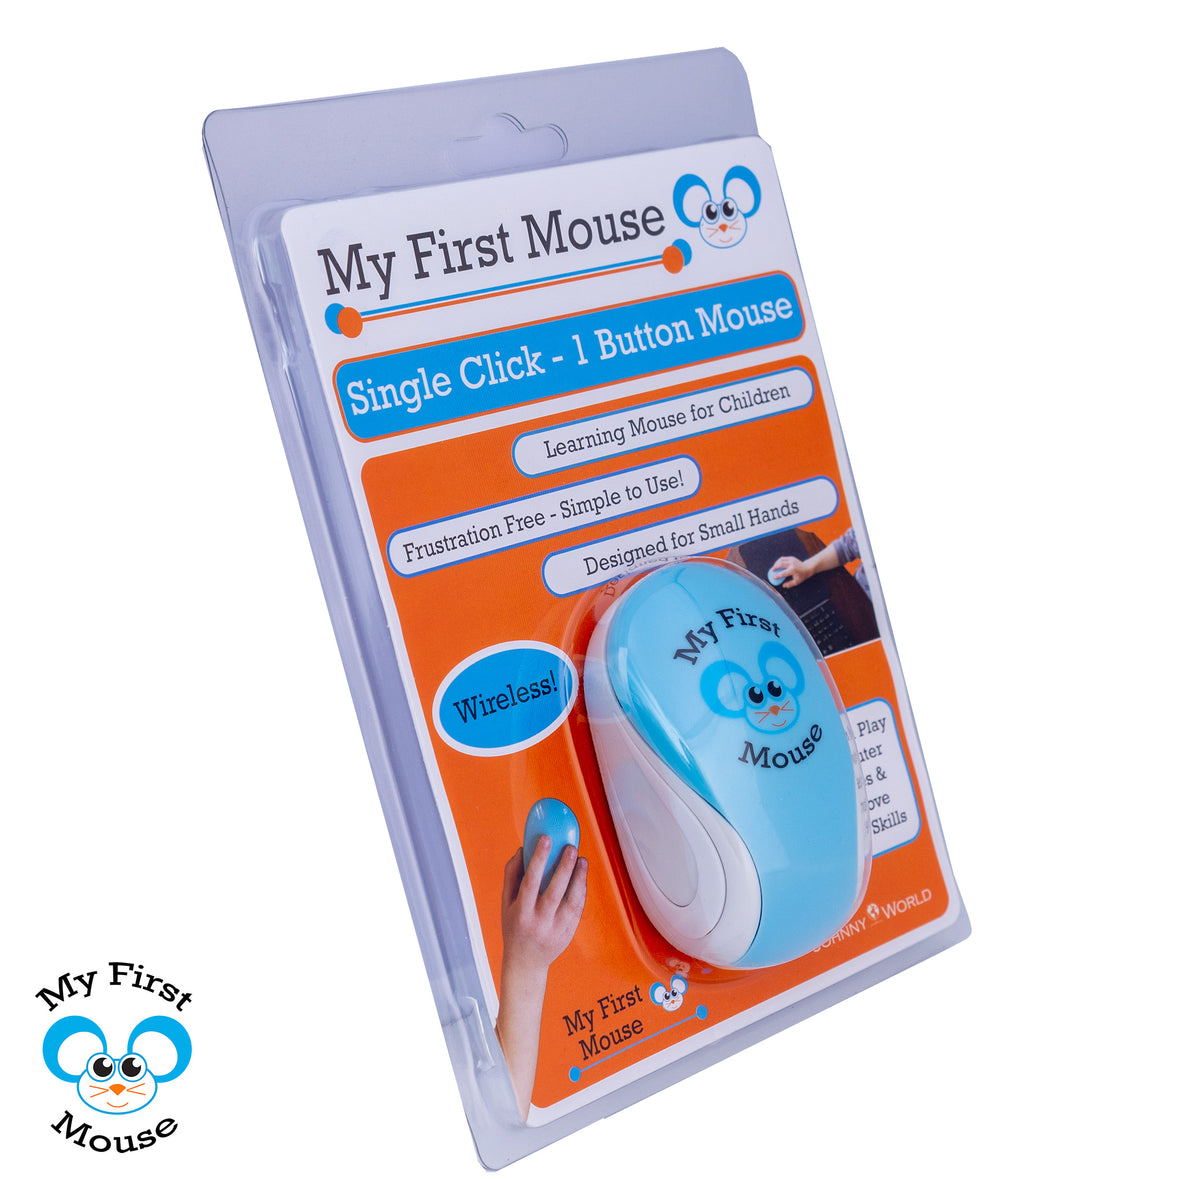 My First Mouse by Johnny World™ – Johnny World Products